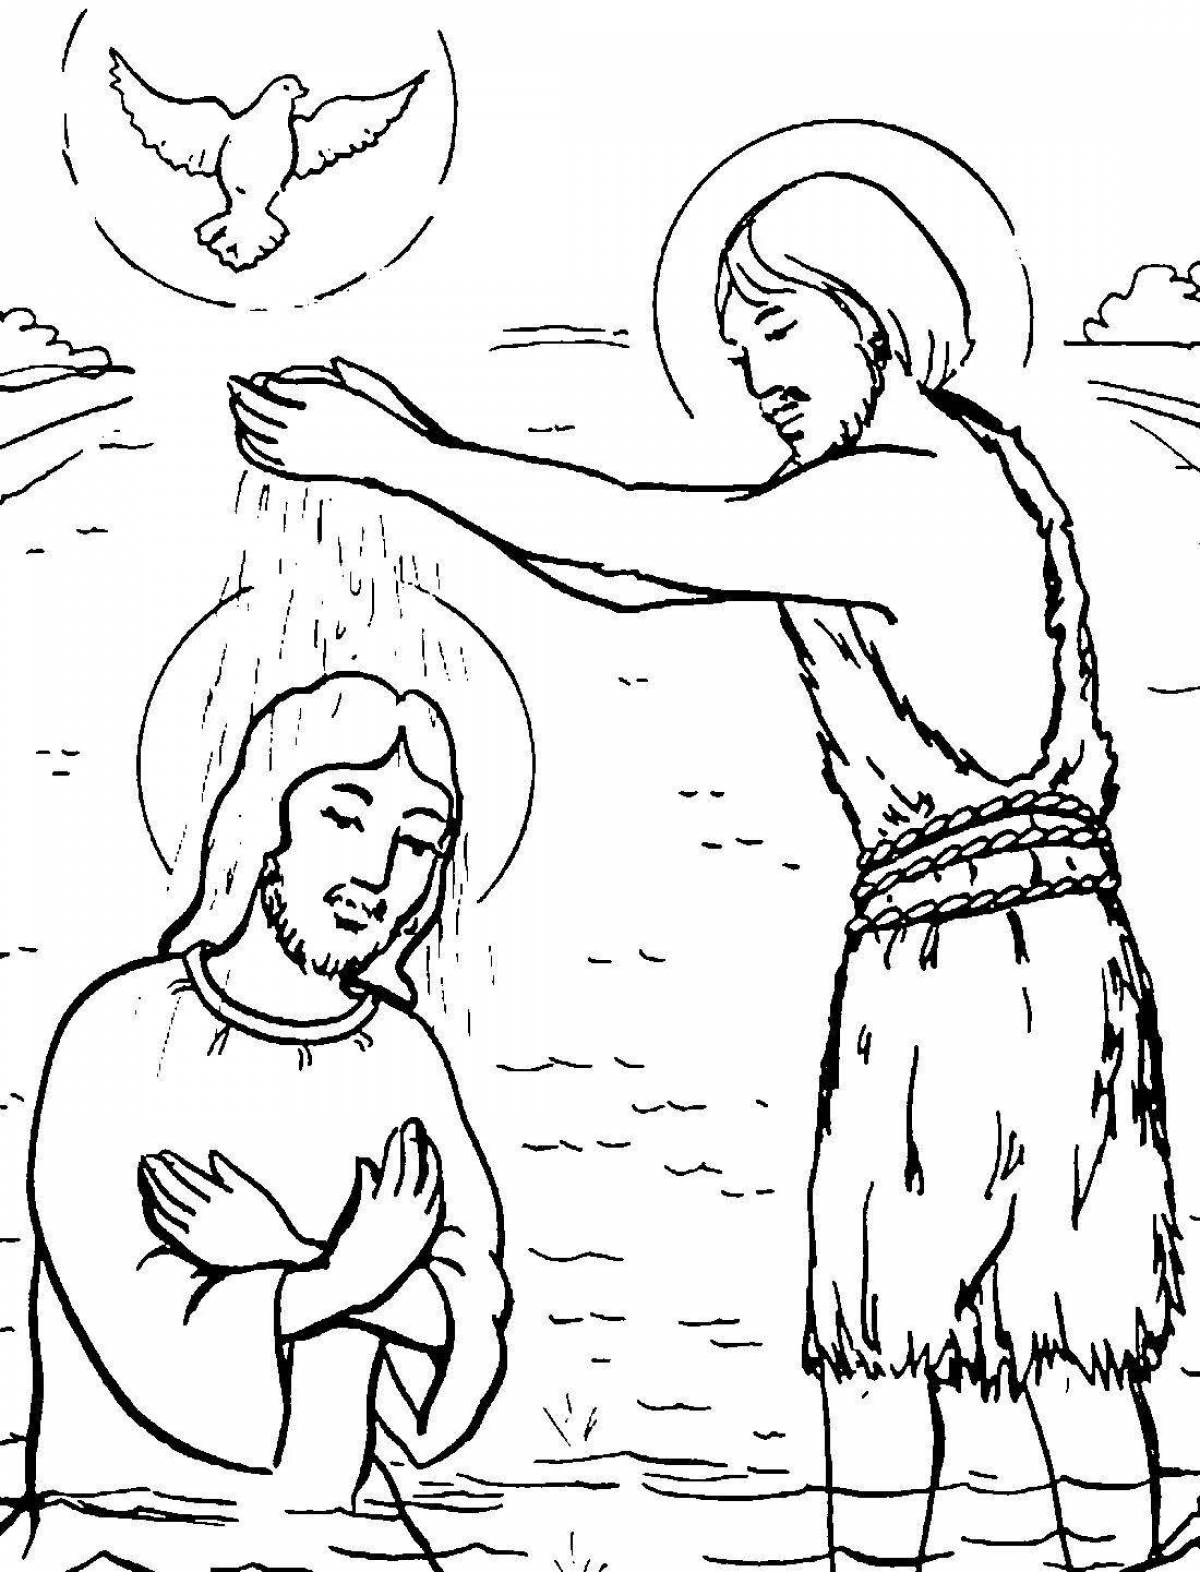 Christening coloring page